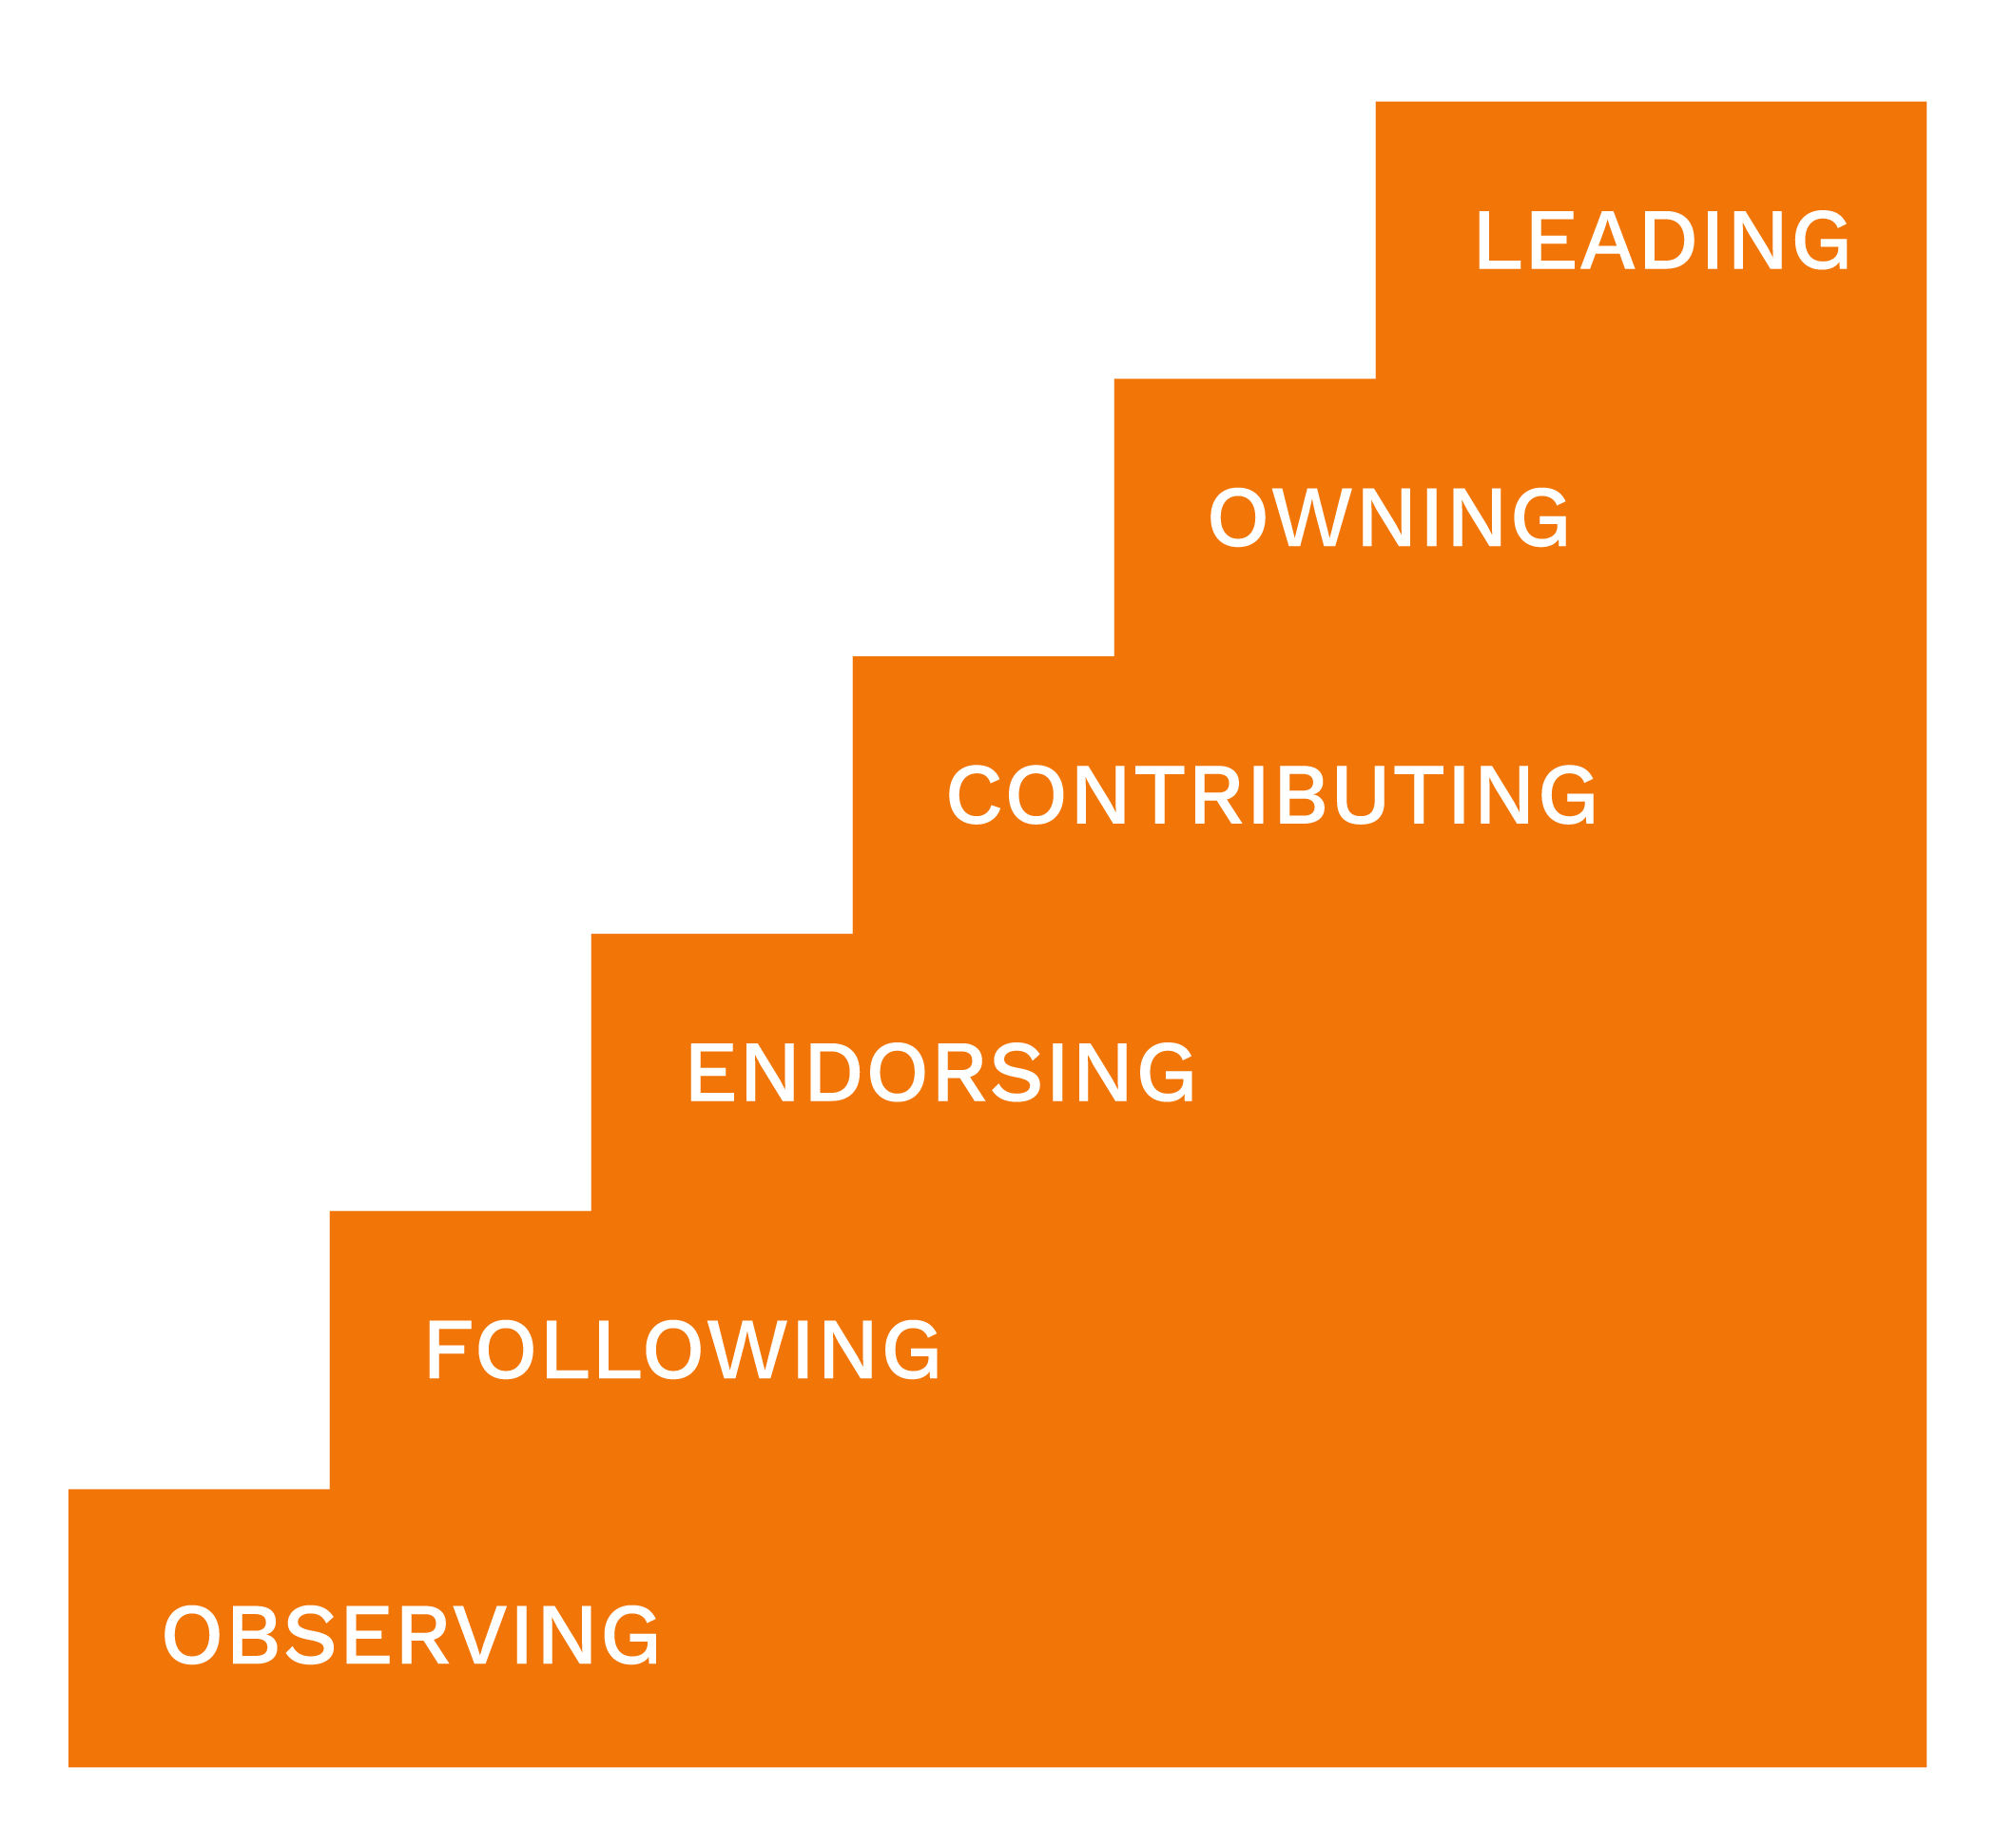 A stair case representing the Engagement Ladder. From bottom to top the steps are labelled as follows: Observing, following, endorsing, contributing, owning, and leading.